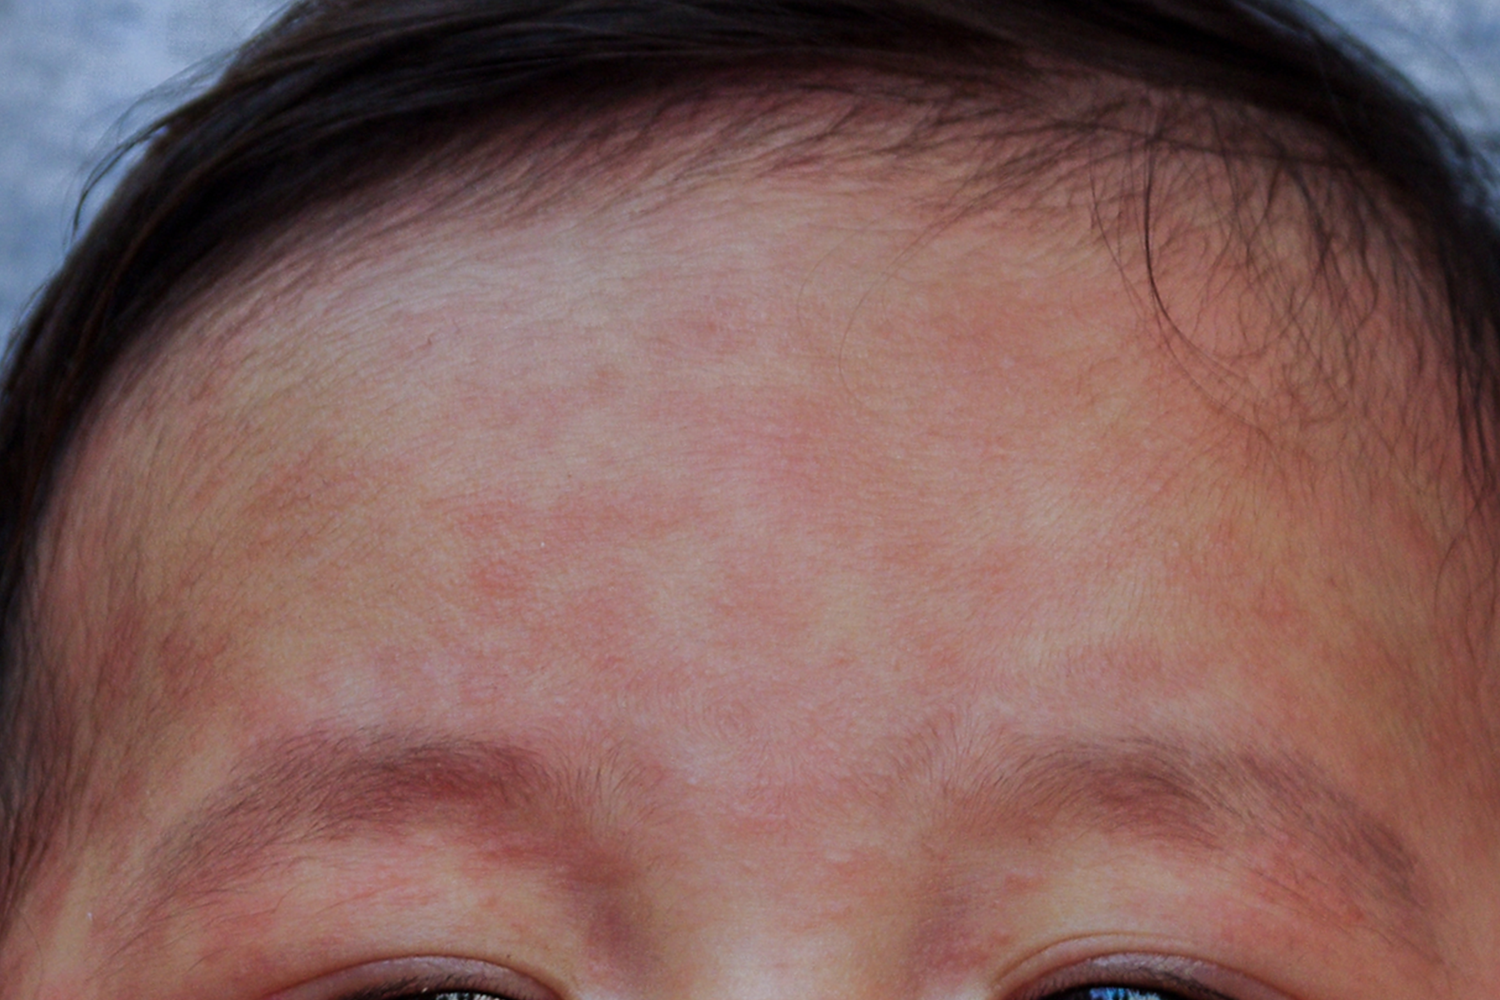 Measles spots on a child's forehead